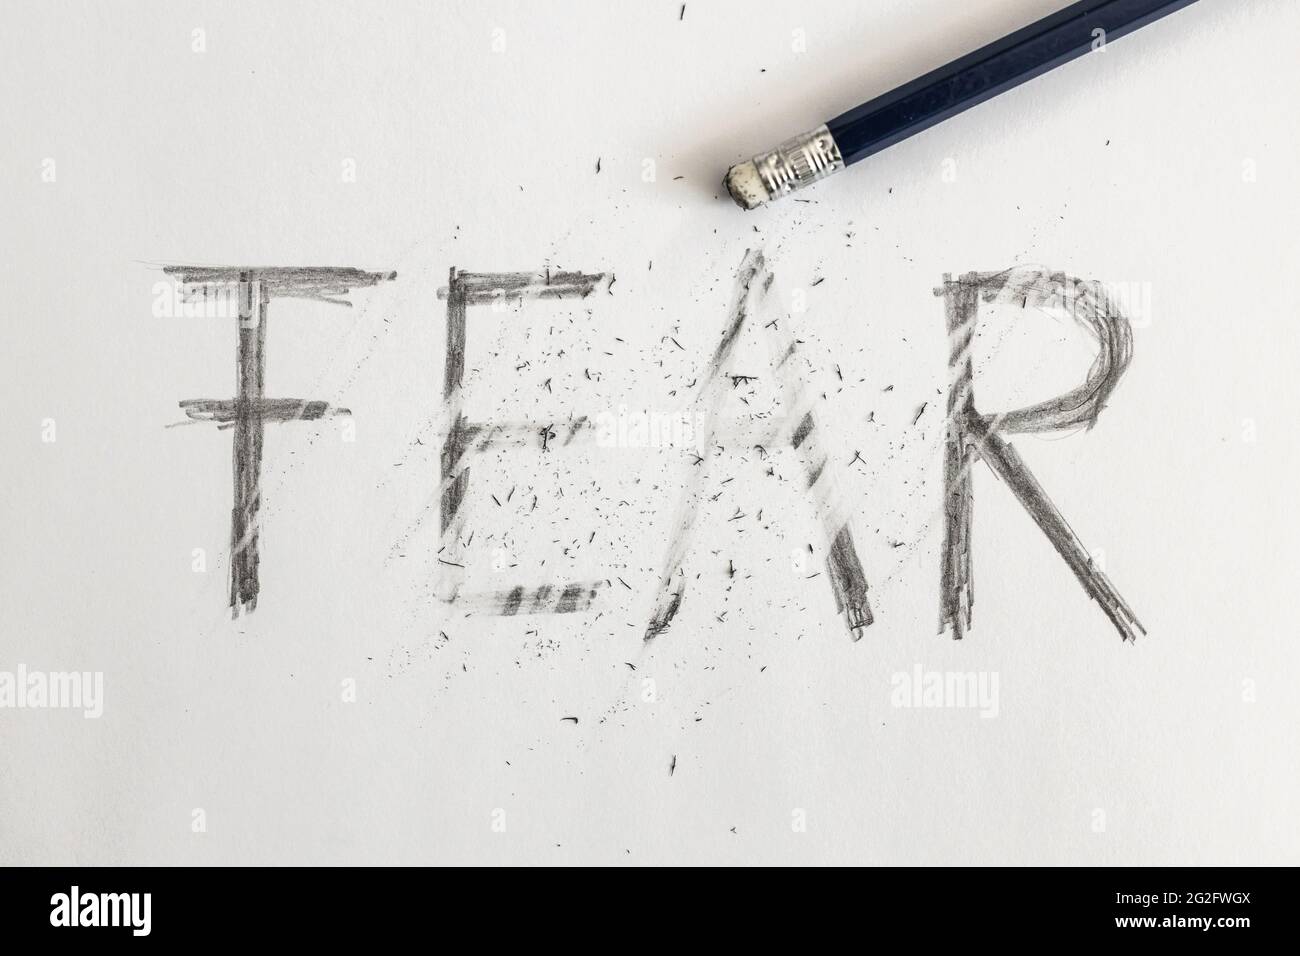 Erasing fear. Fear written on white paper with a pencil, erased with an eraser. Symbolic for overcoming fear or treating fear. Stock Photo